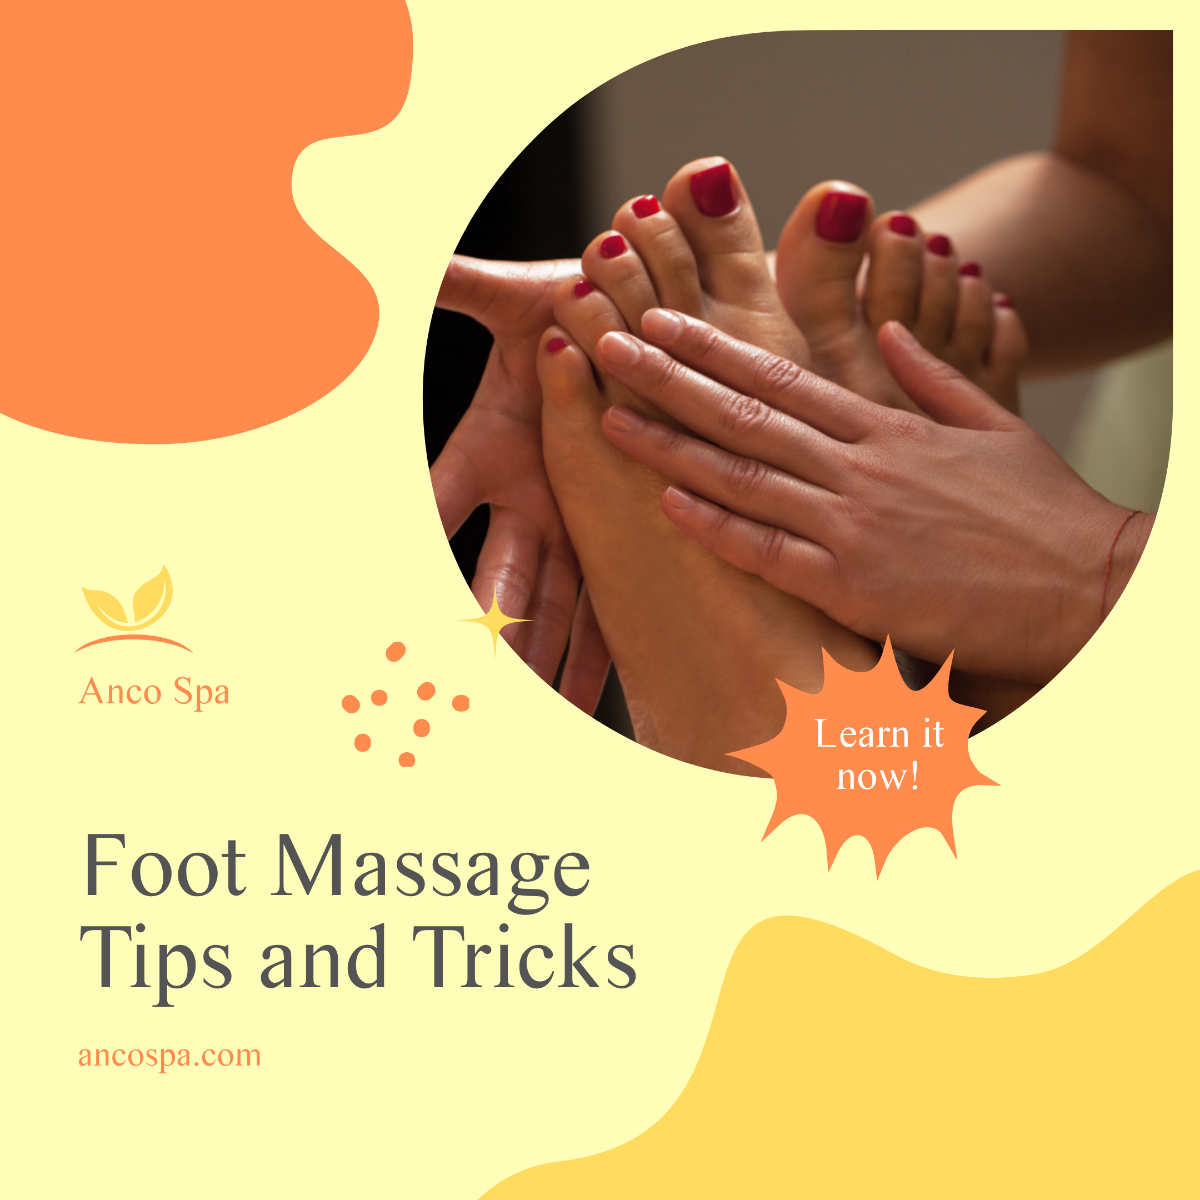 Foot Massage Tips And Tricks Post, Instagram, Facebook Template